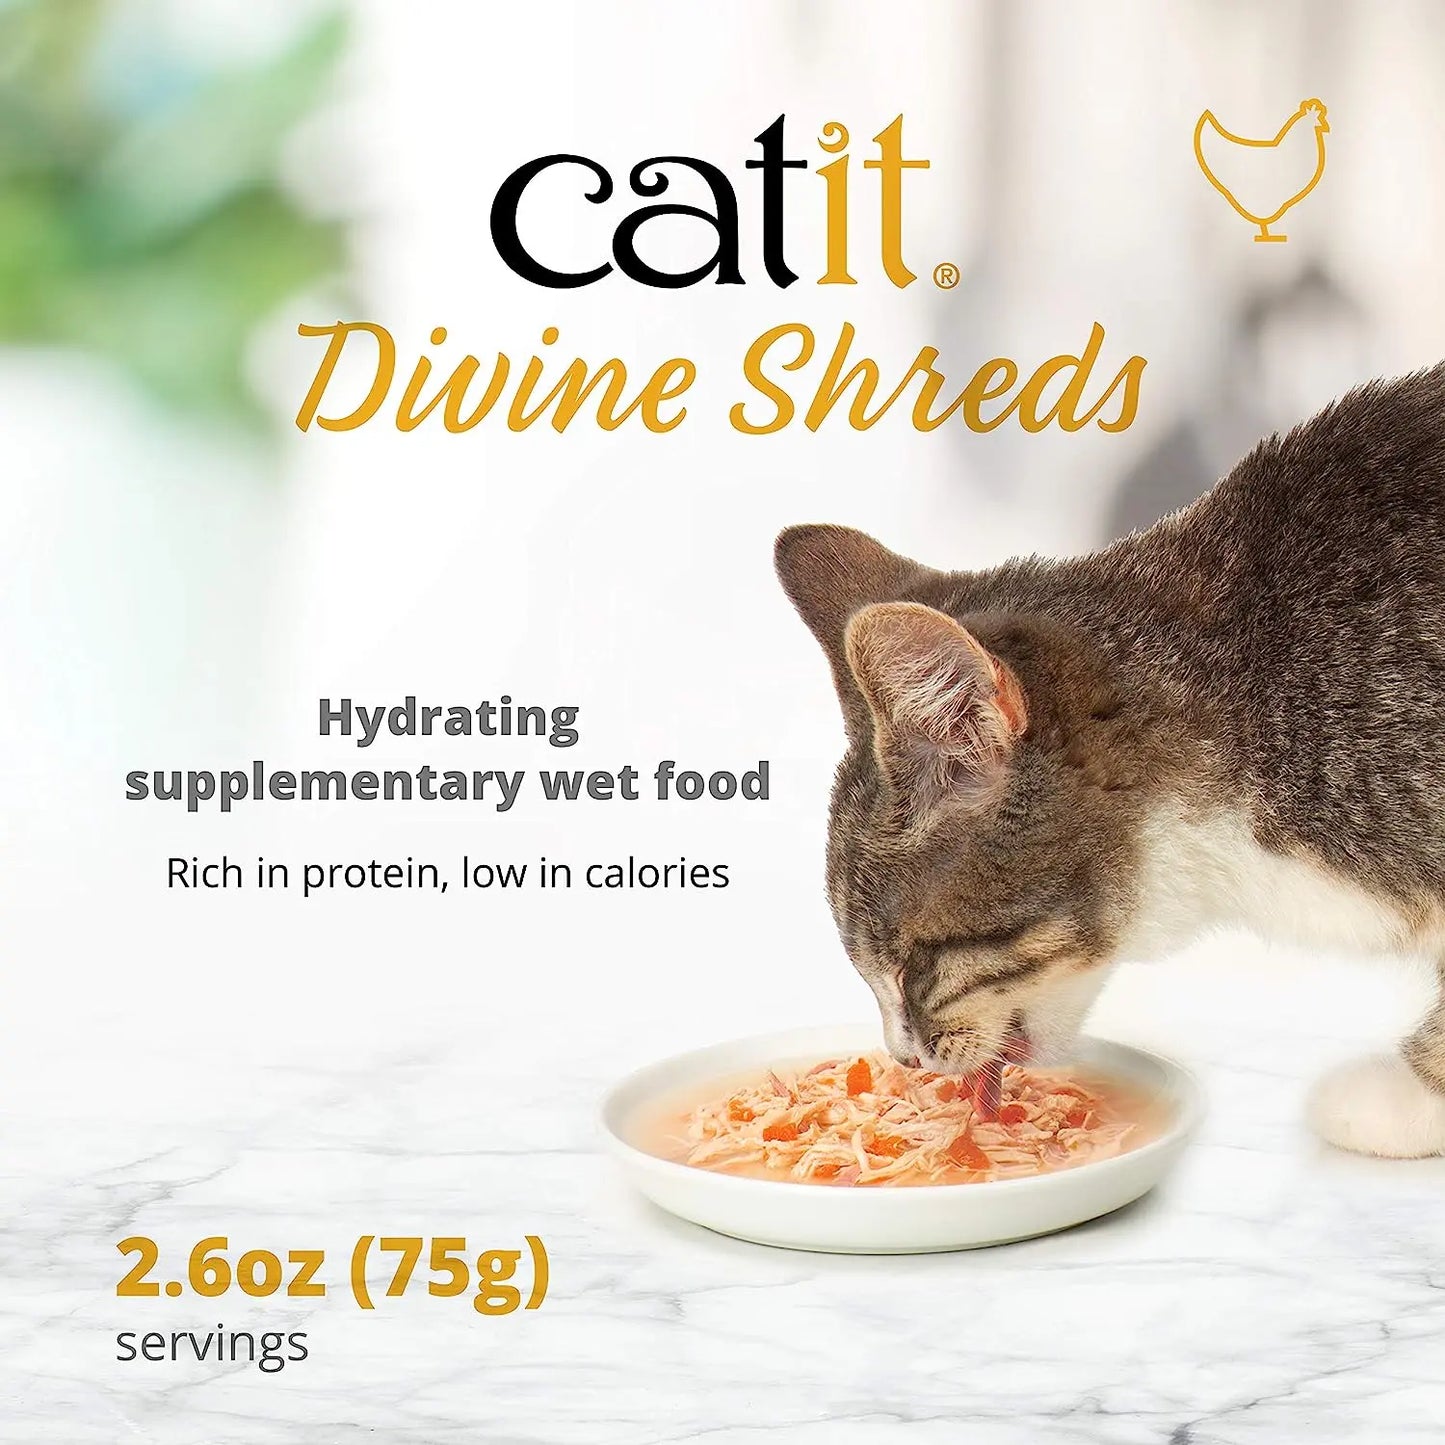 Catit Divine Shreds Chicken with Tuna and Carrot CatIt